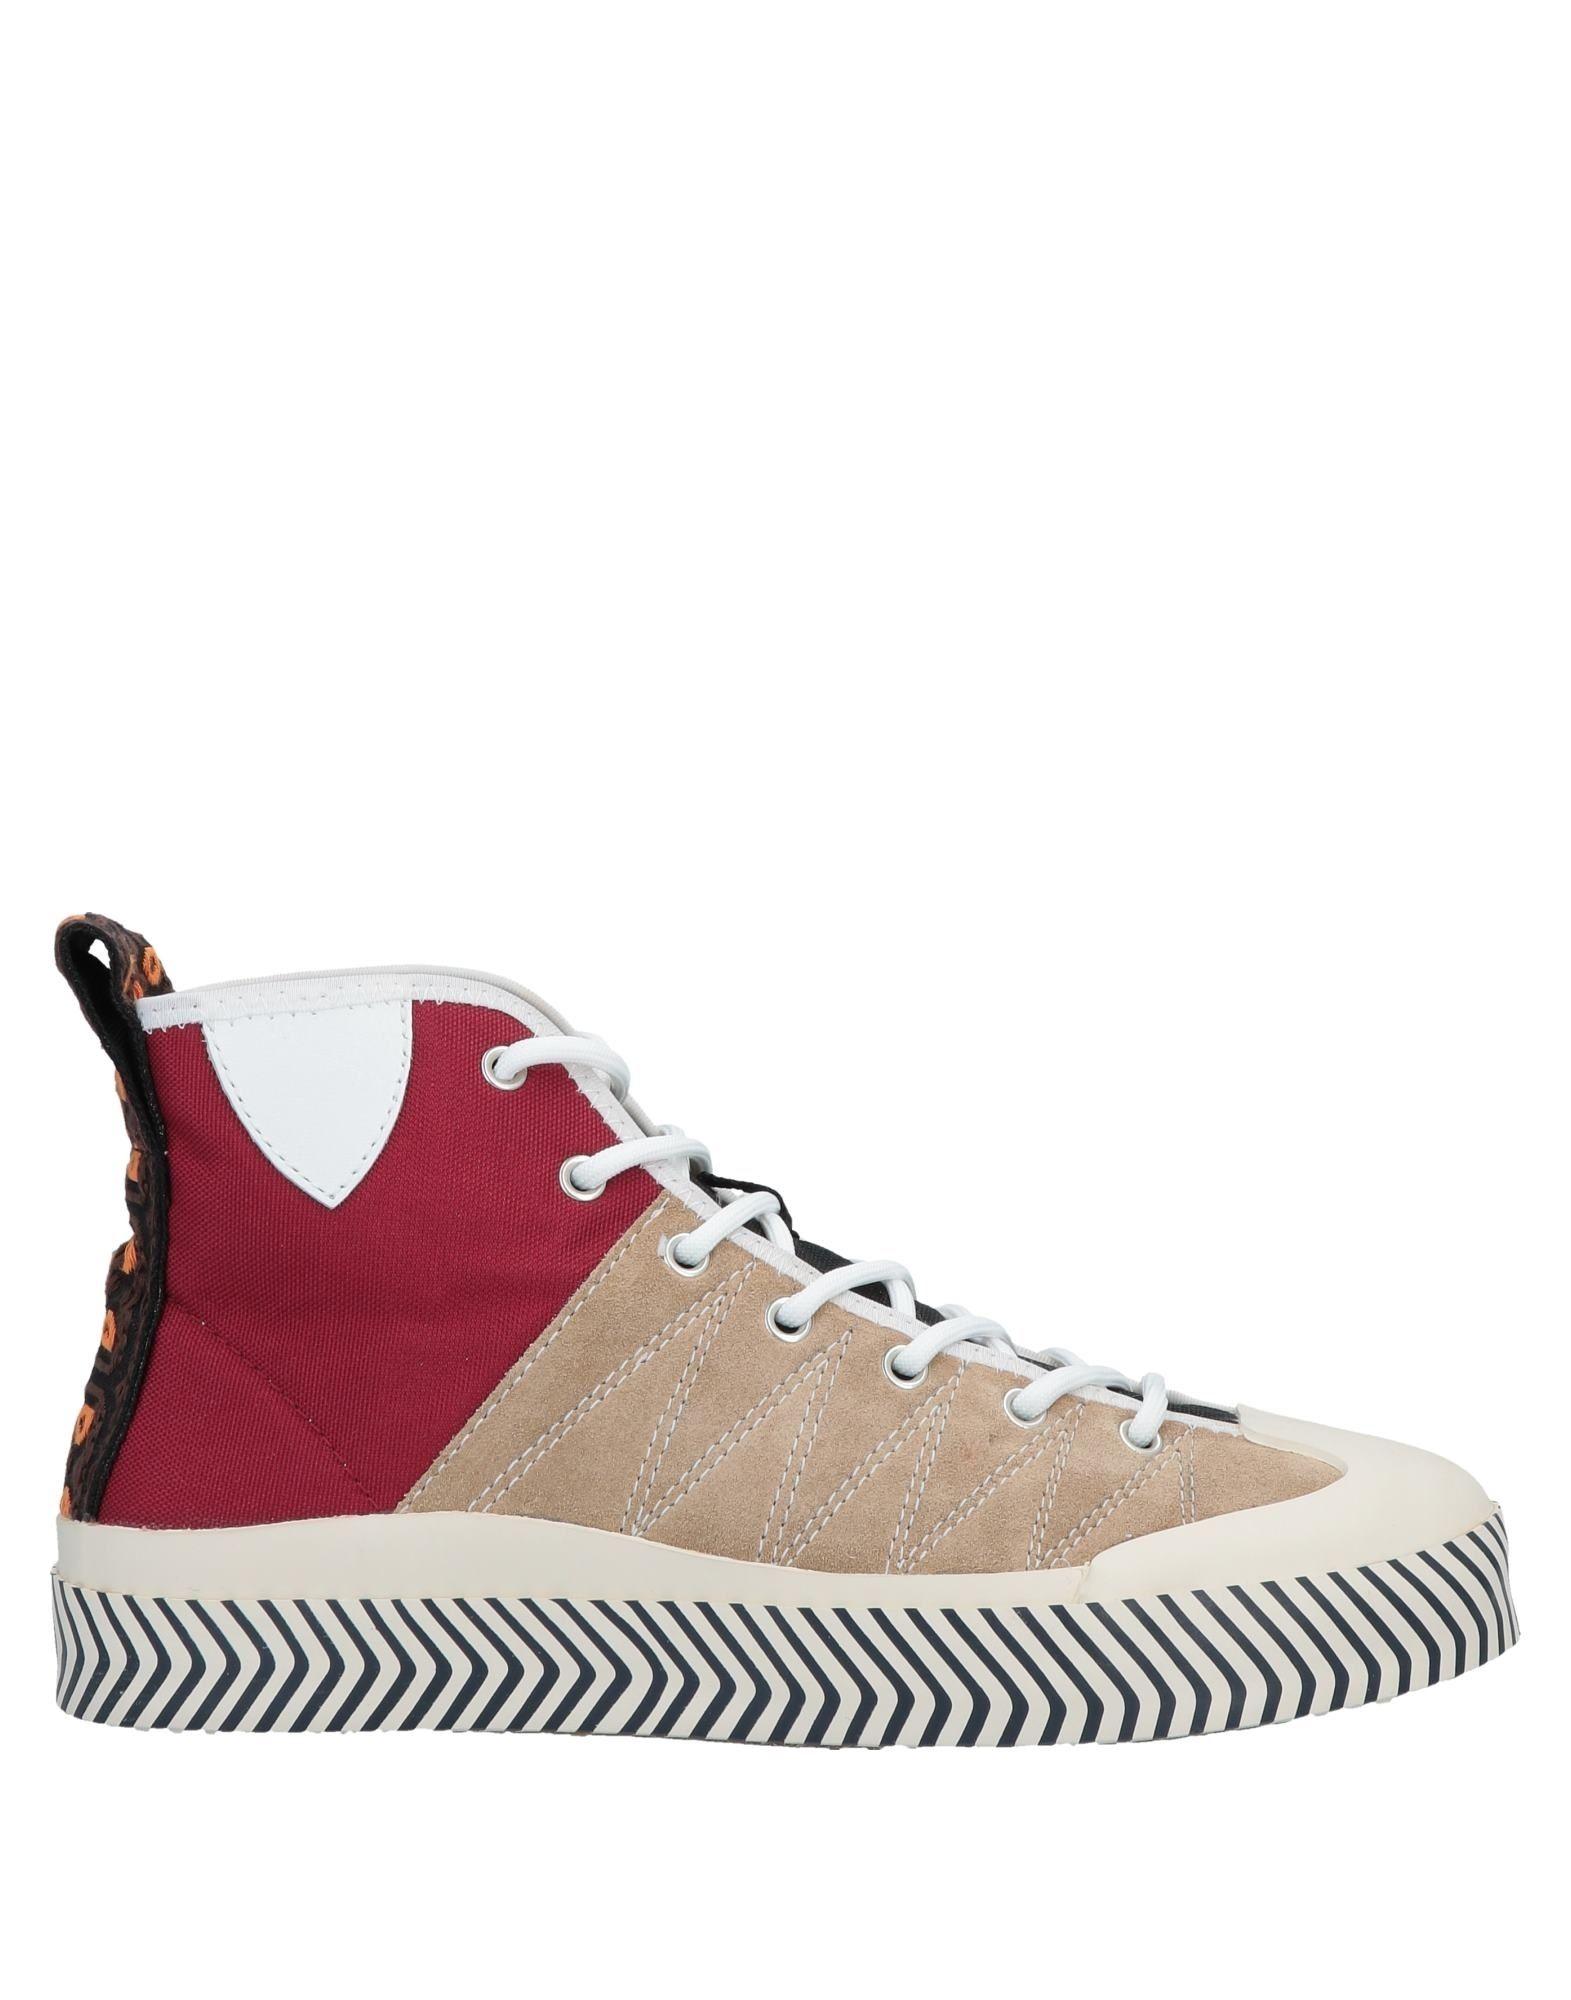 Acne Studios Canvas High-tops & Sneakers for Men - Lyst